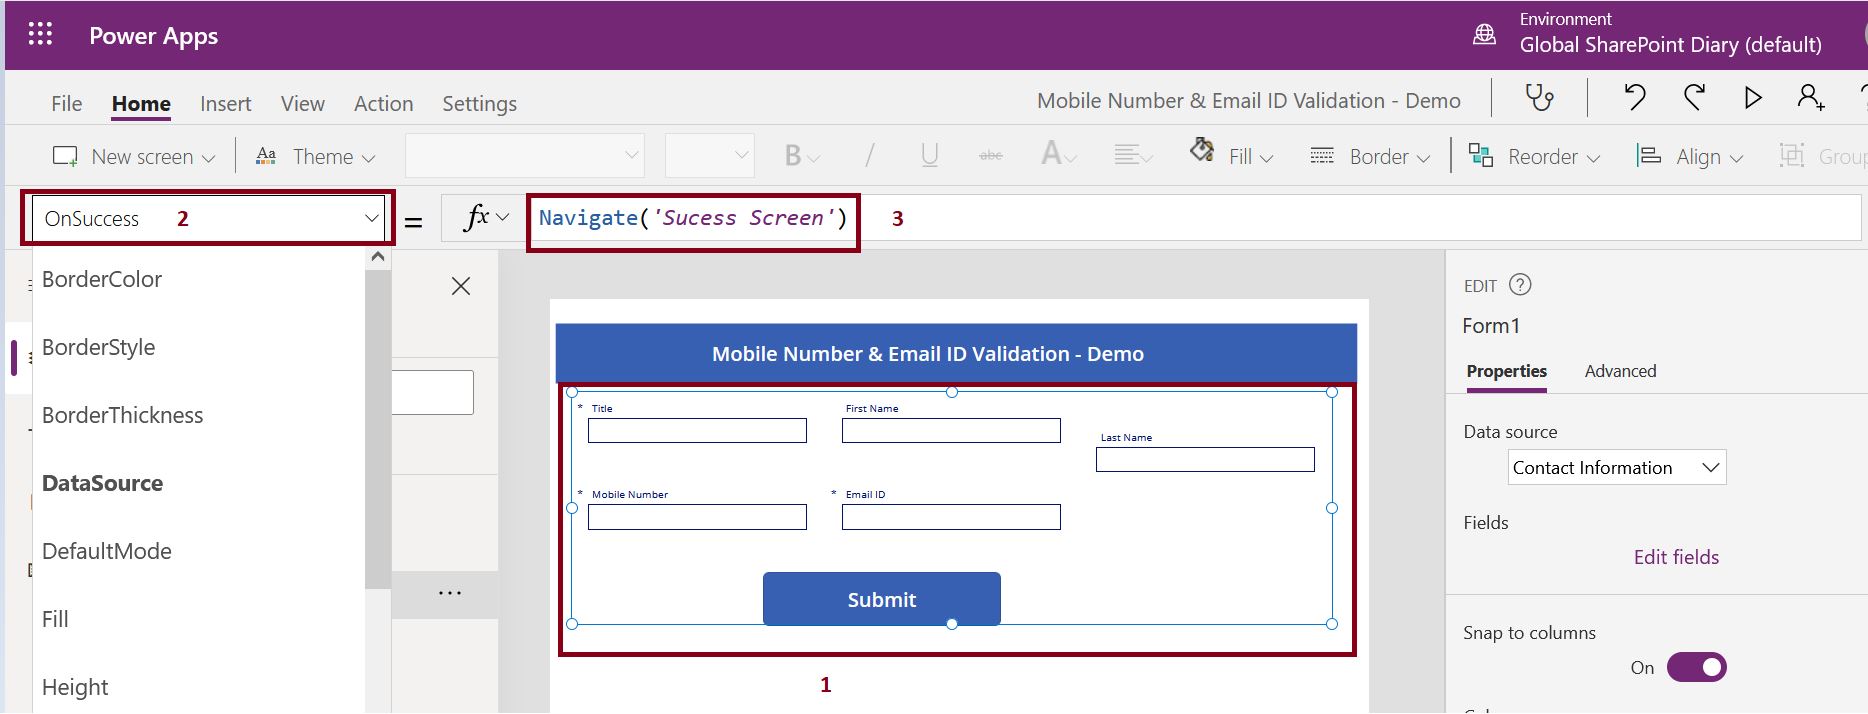 PowerApps OnSuccess event to navigate to successful screen